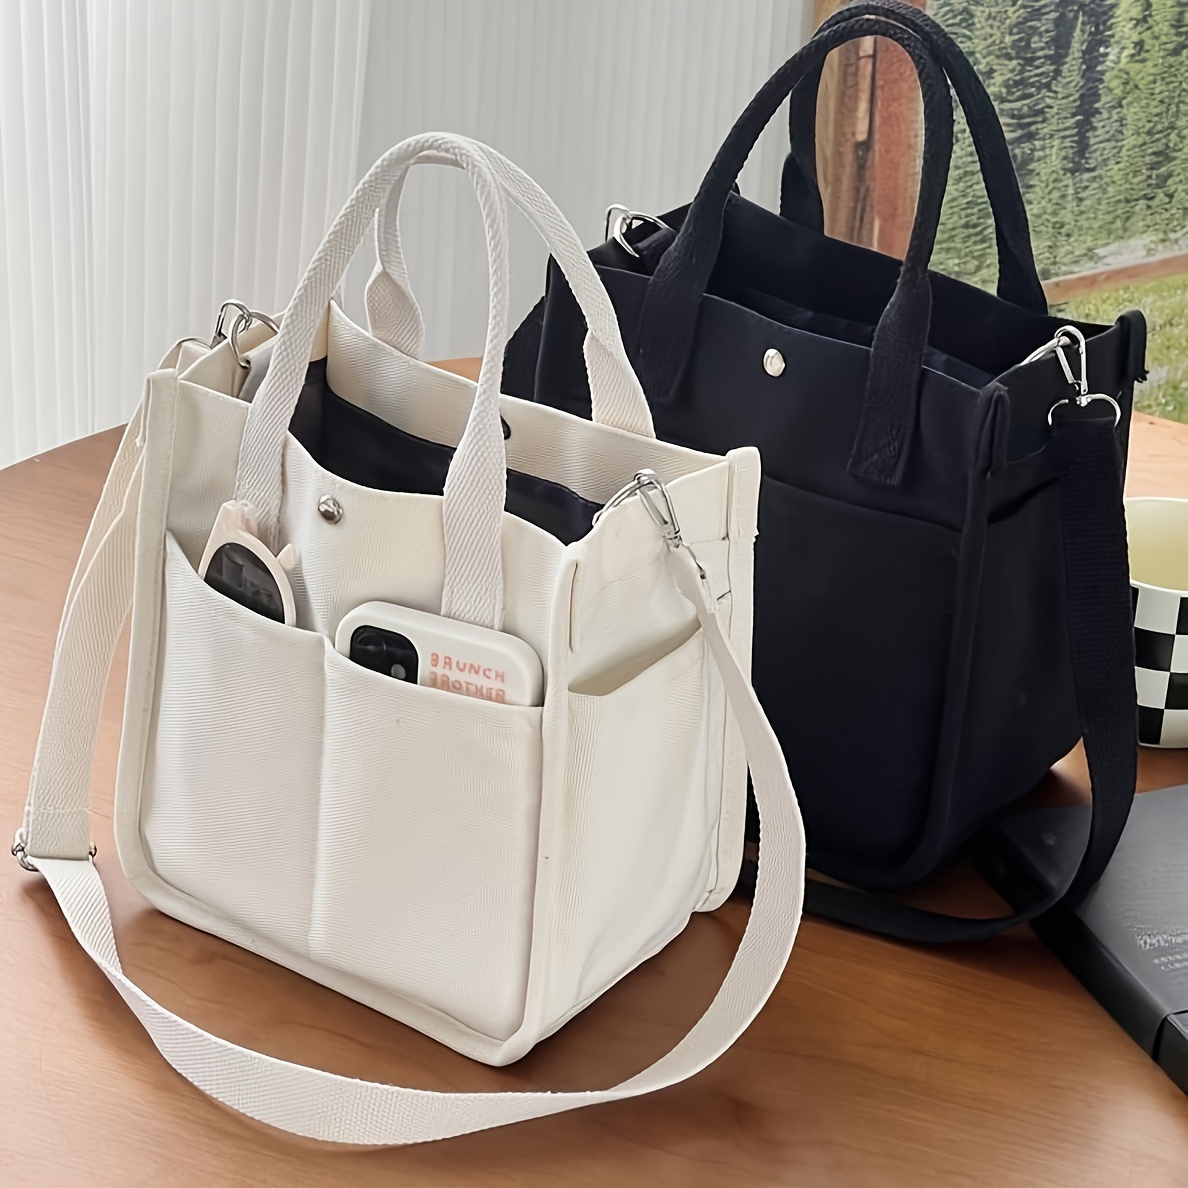 

Minimalist Solid Color Square Satchel Bag, All-match Top Handle Handbag For Daily Use, Commuter Bag With Multi Pockets (8.26'' * 5.11'' * 8.66'' )